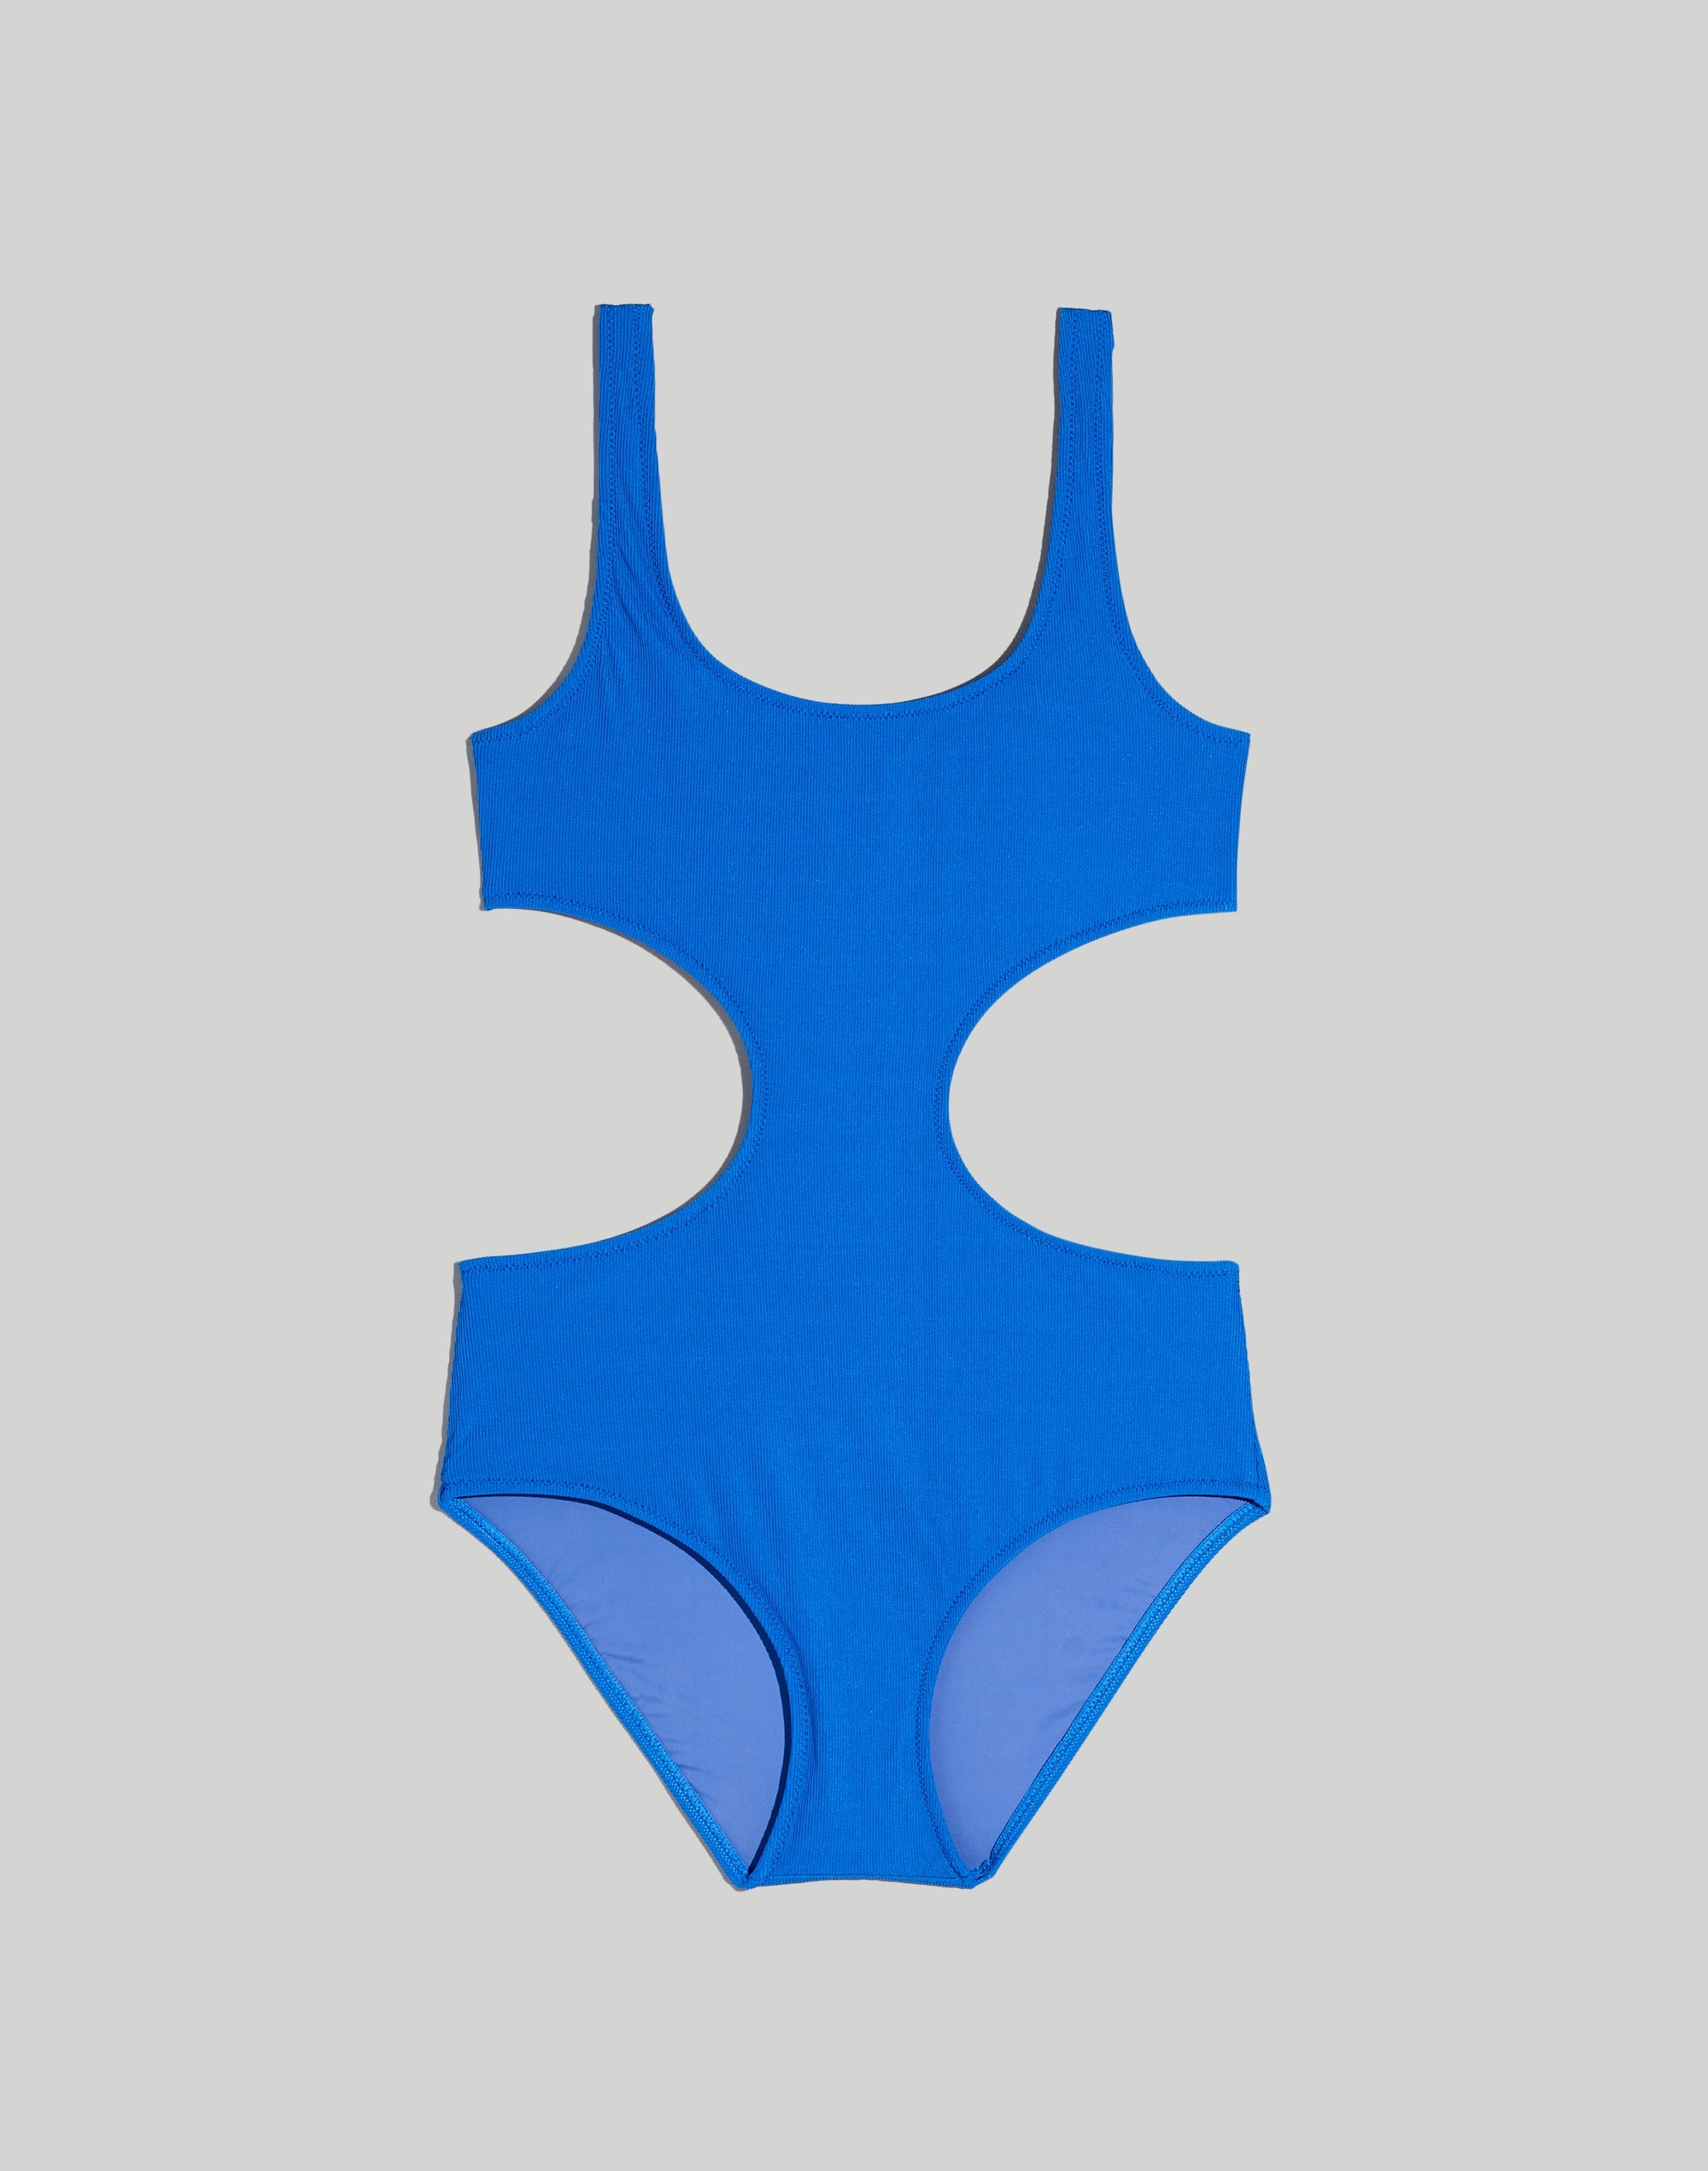 Solid & Striped® Sarah Cutout One-Piece Swimsuit